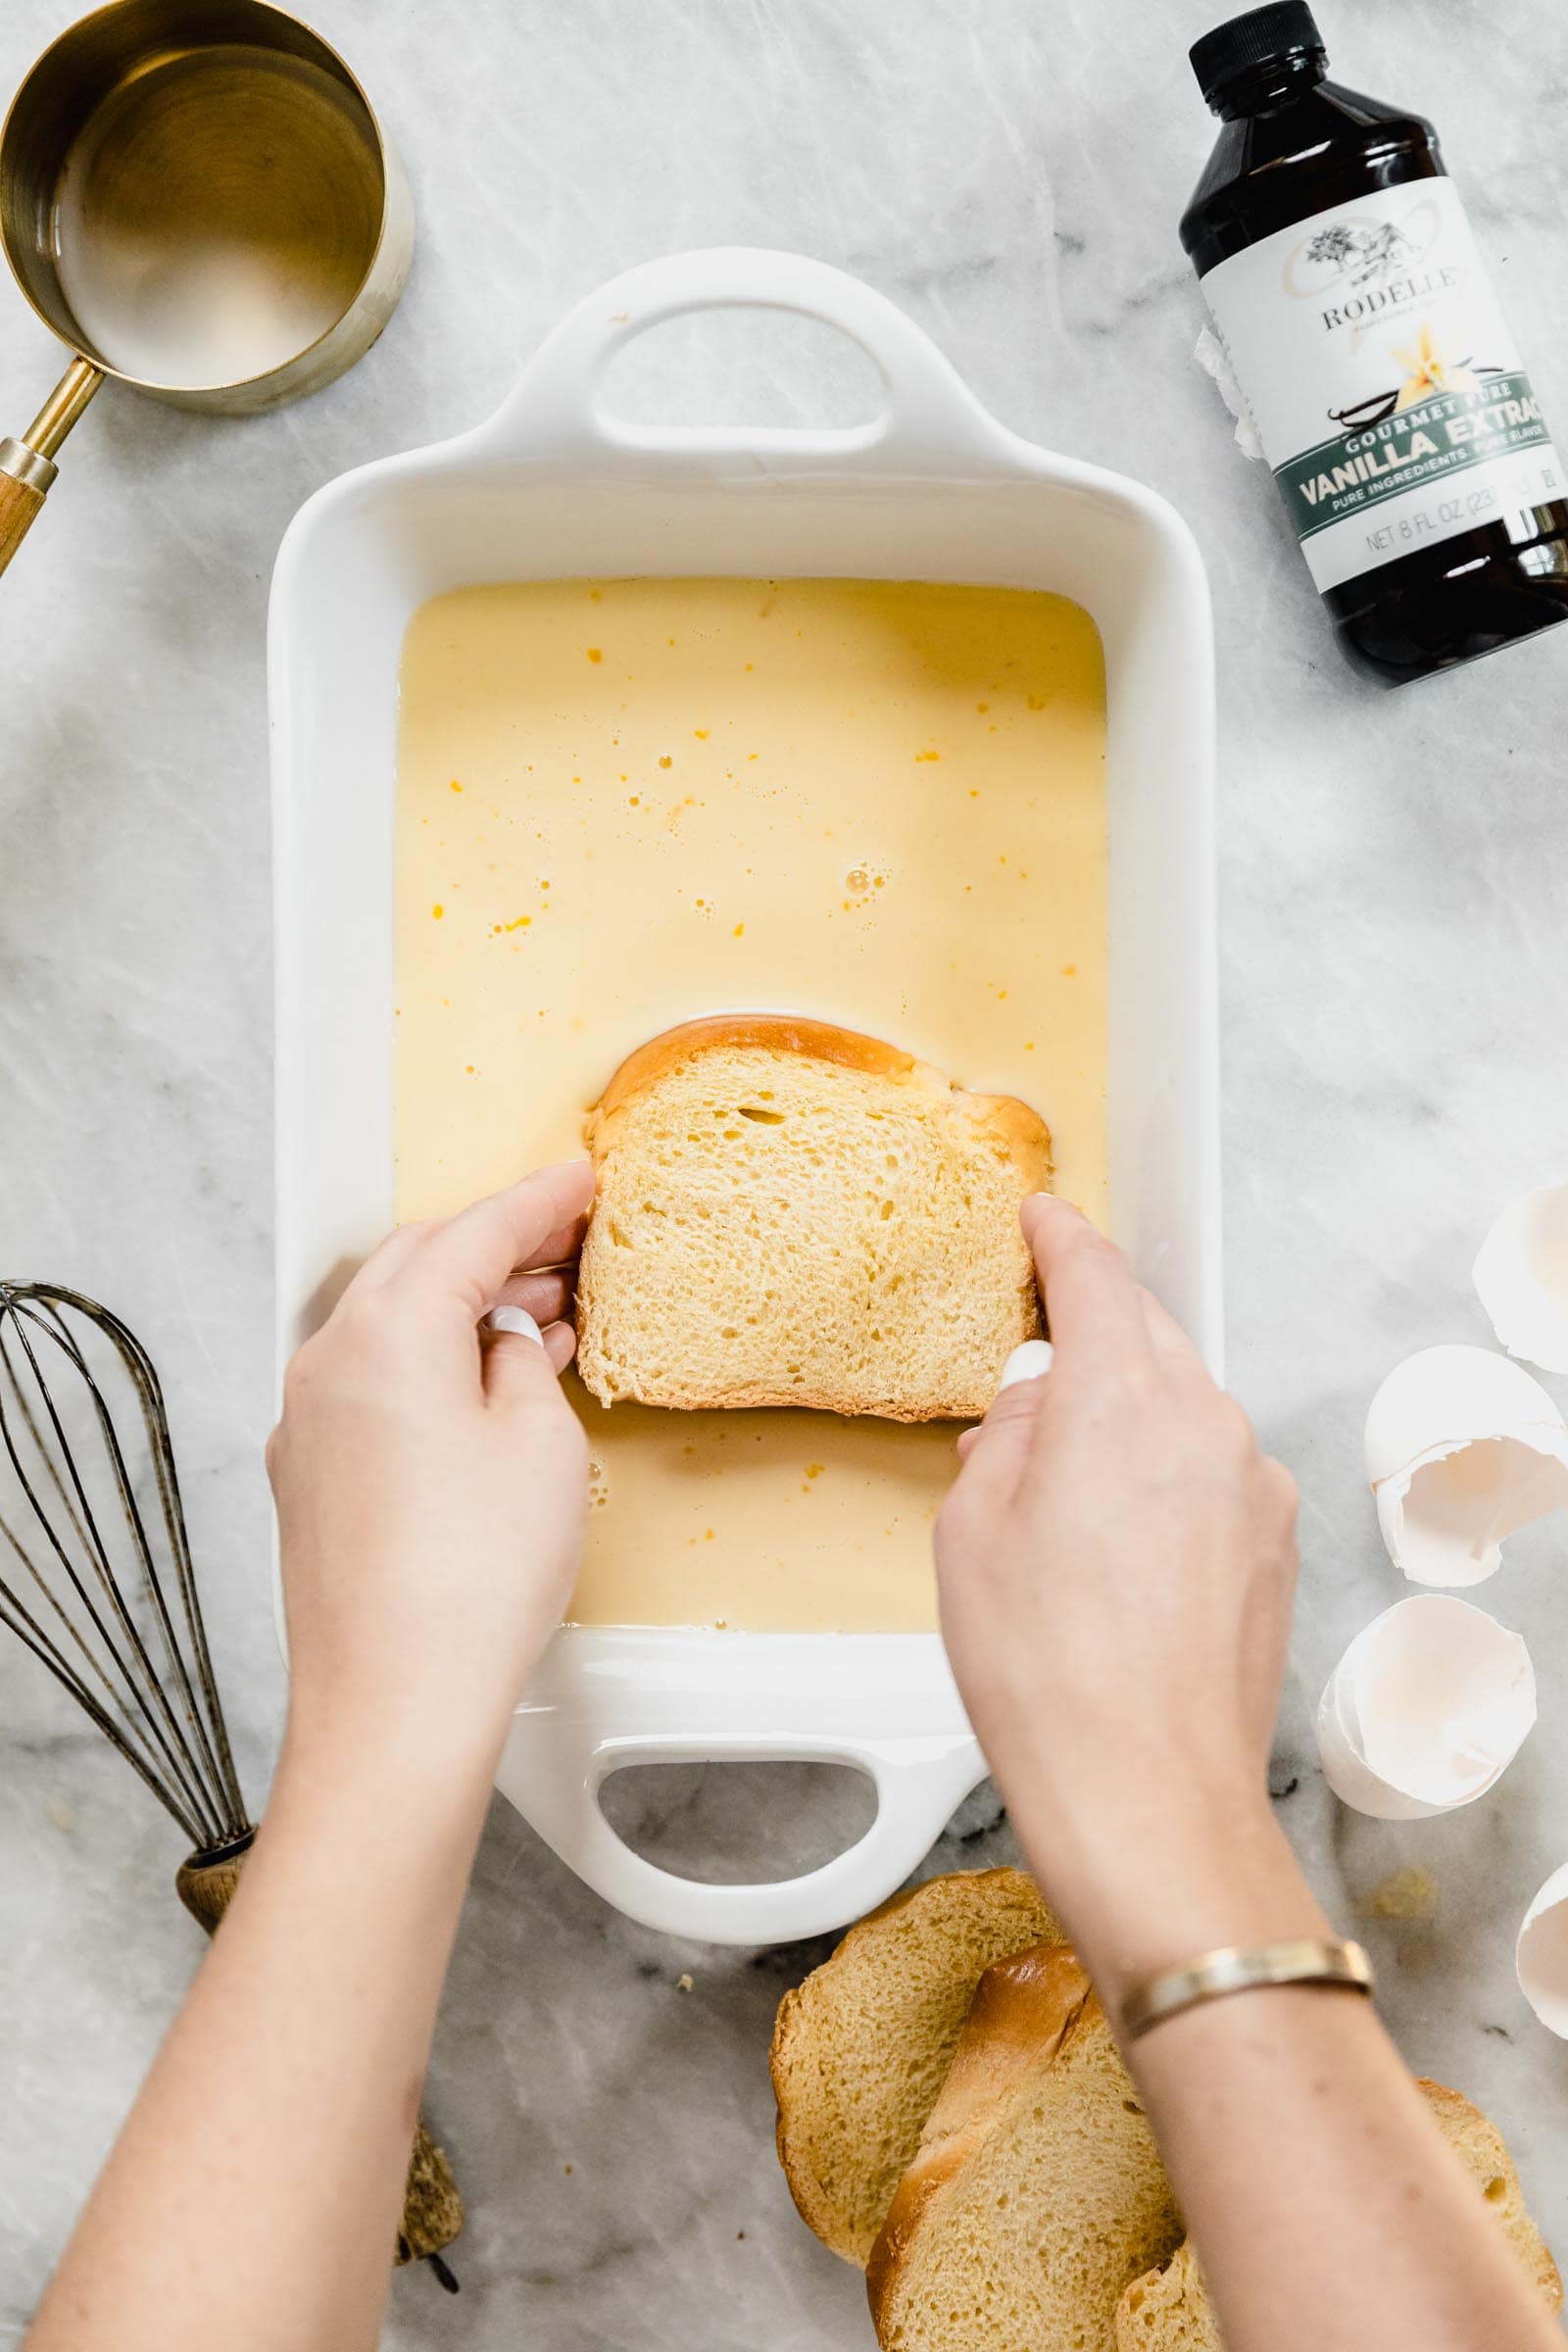 dip one piece of bread in at a time to soak